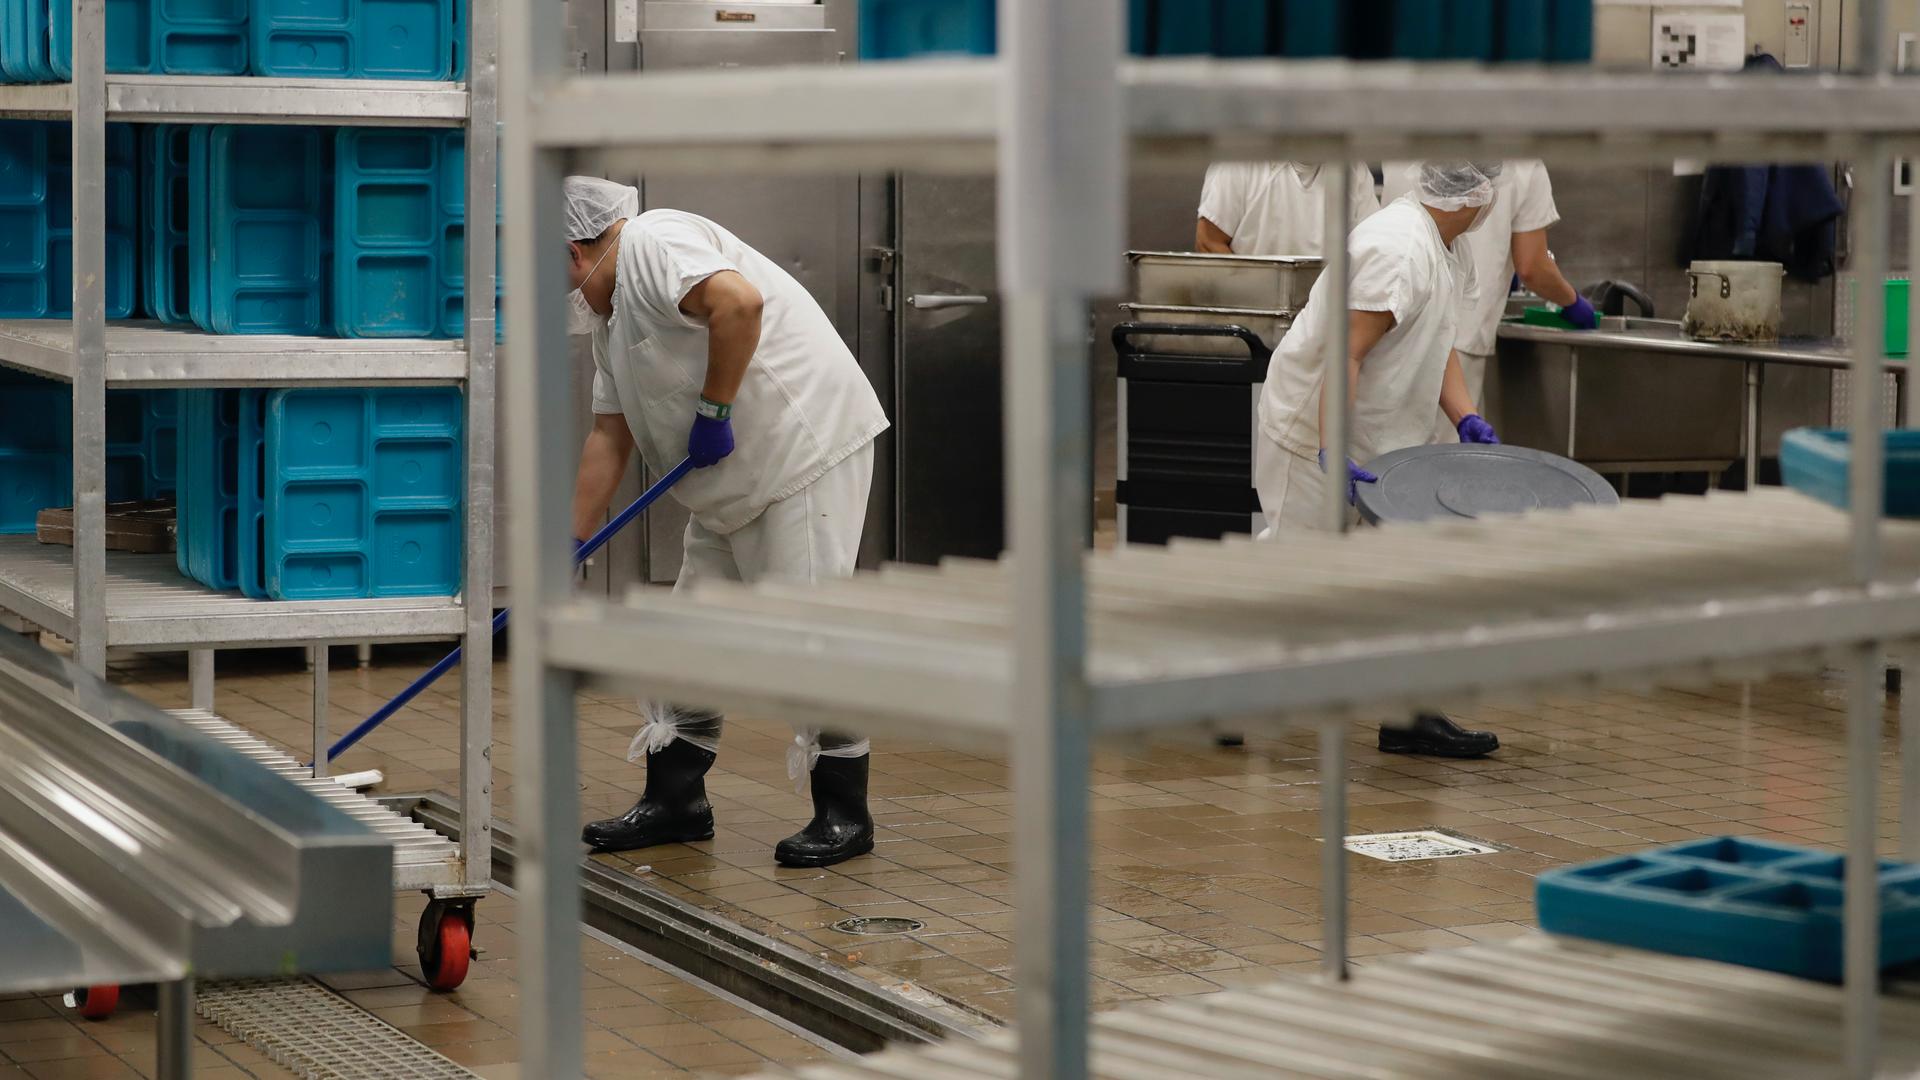 Workers are shown in the kitchen of the US Immigration and Customs Enforcement (ICE) detention facility in Tacoma, Washington, during a media tour, Sept. 10, 2019. 